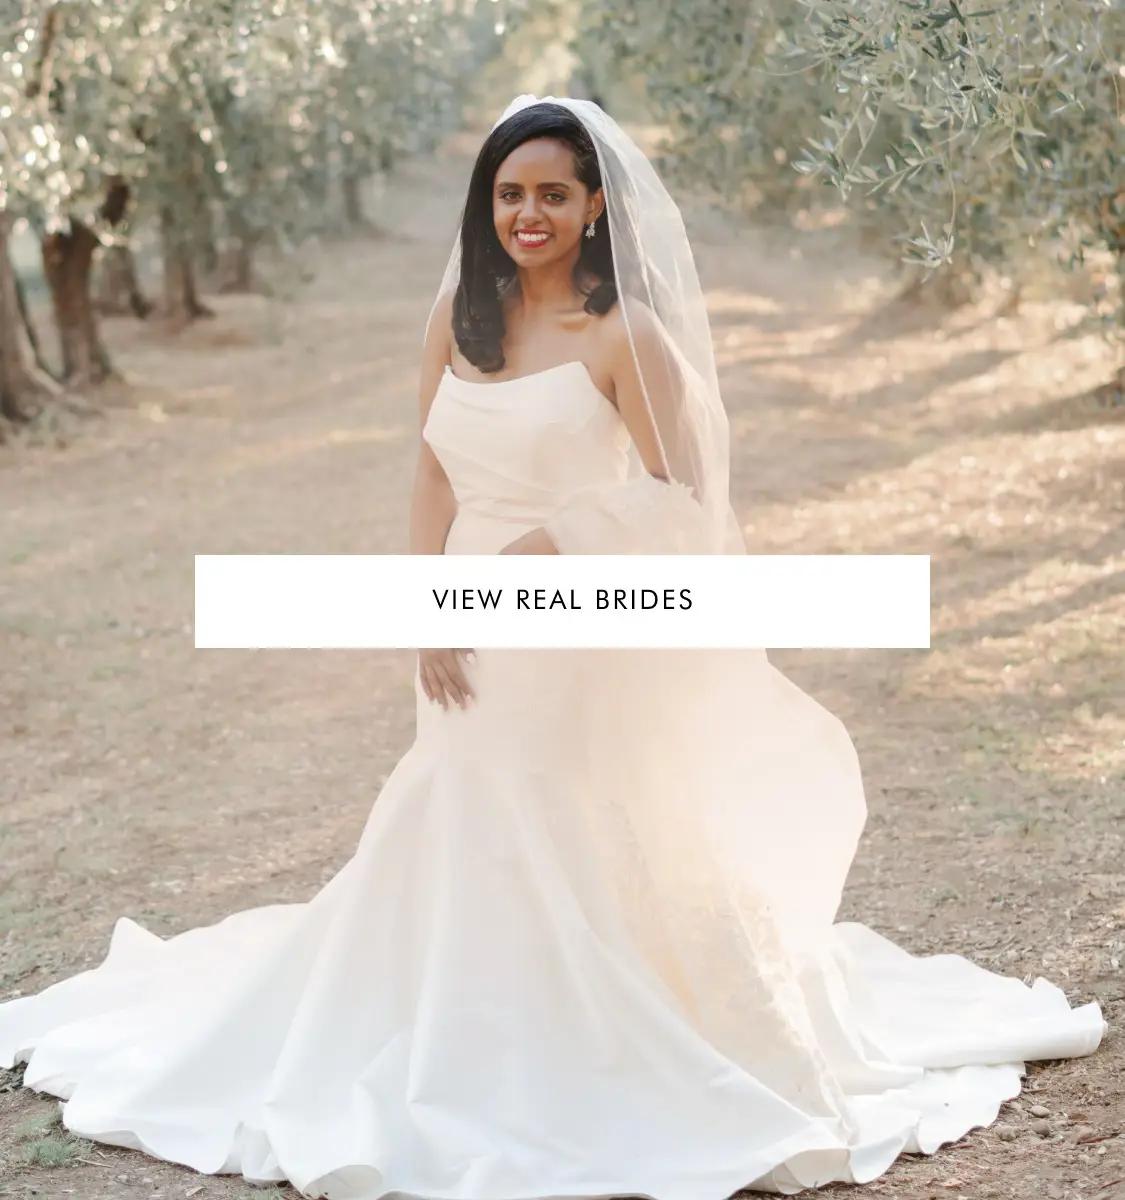 View all real brides mobile